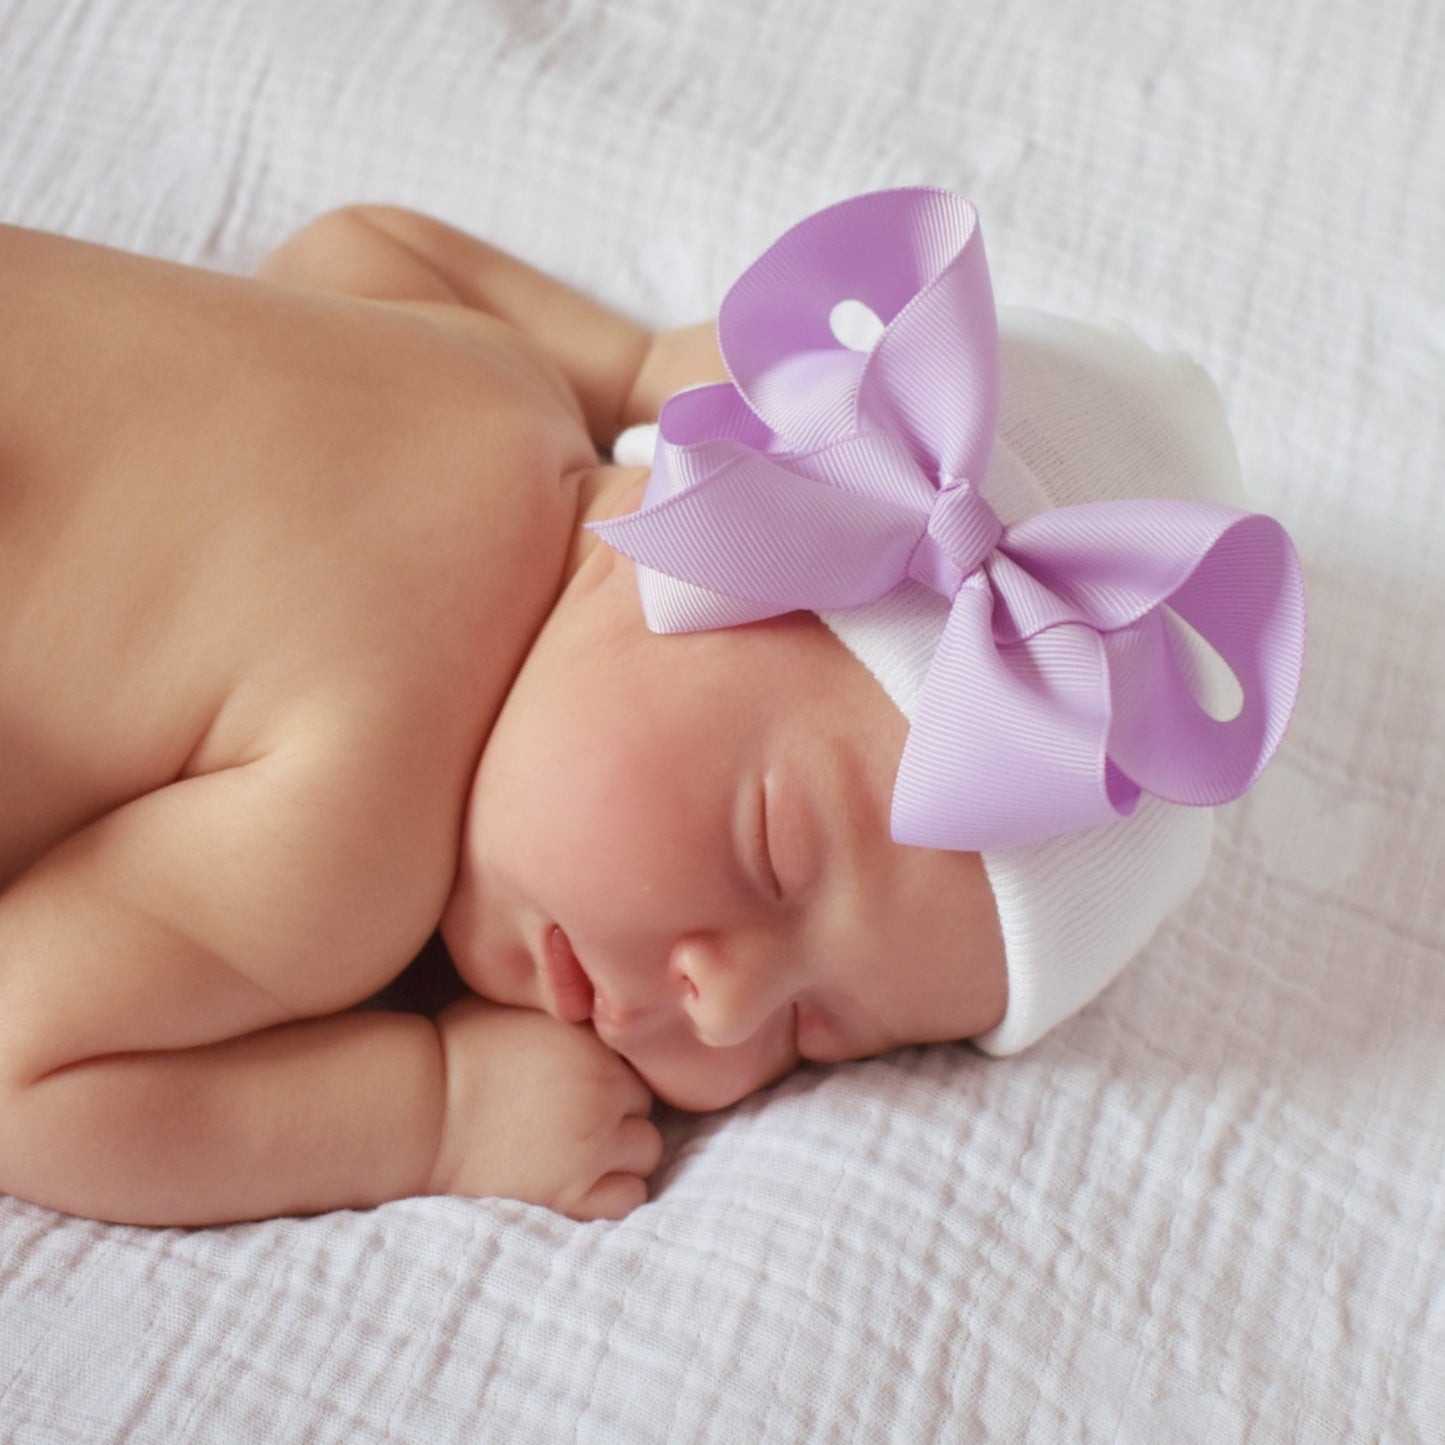 White Newborn Hospital Hat with Classic Purple Lavender Bow